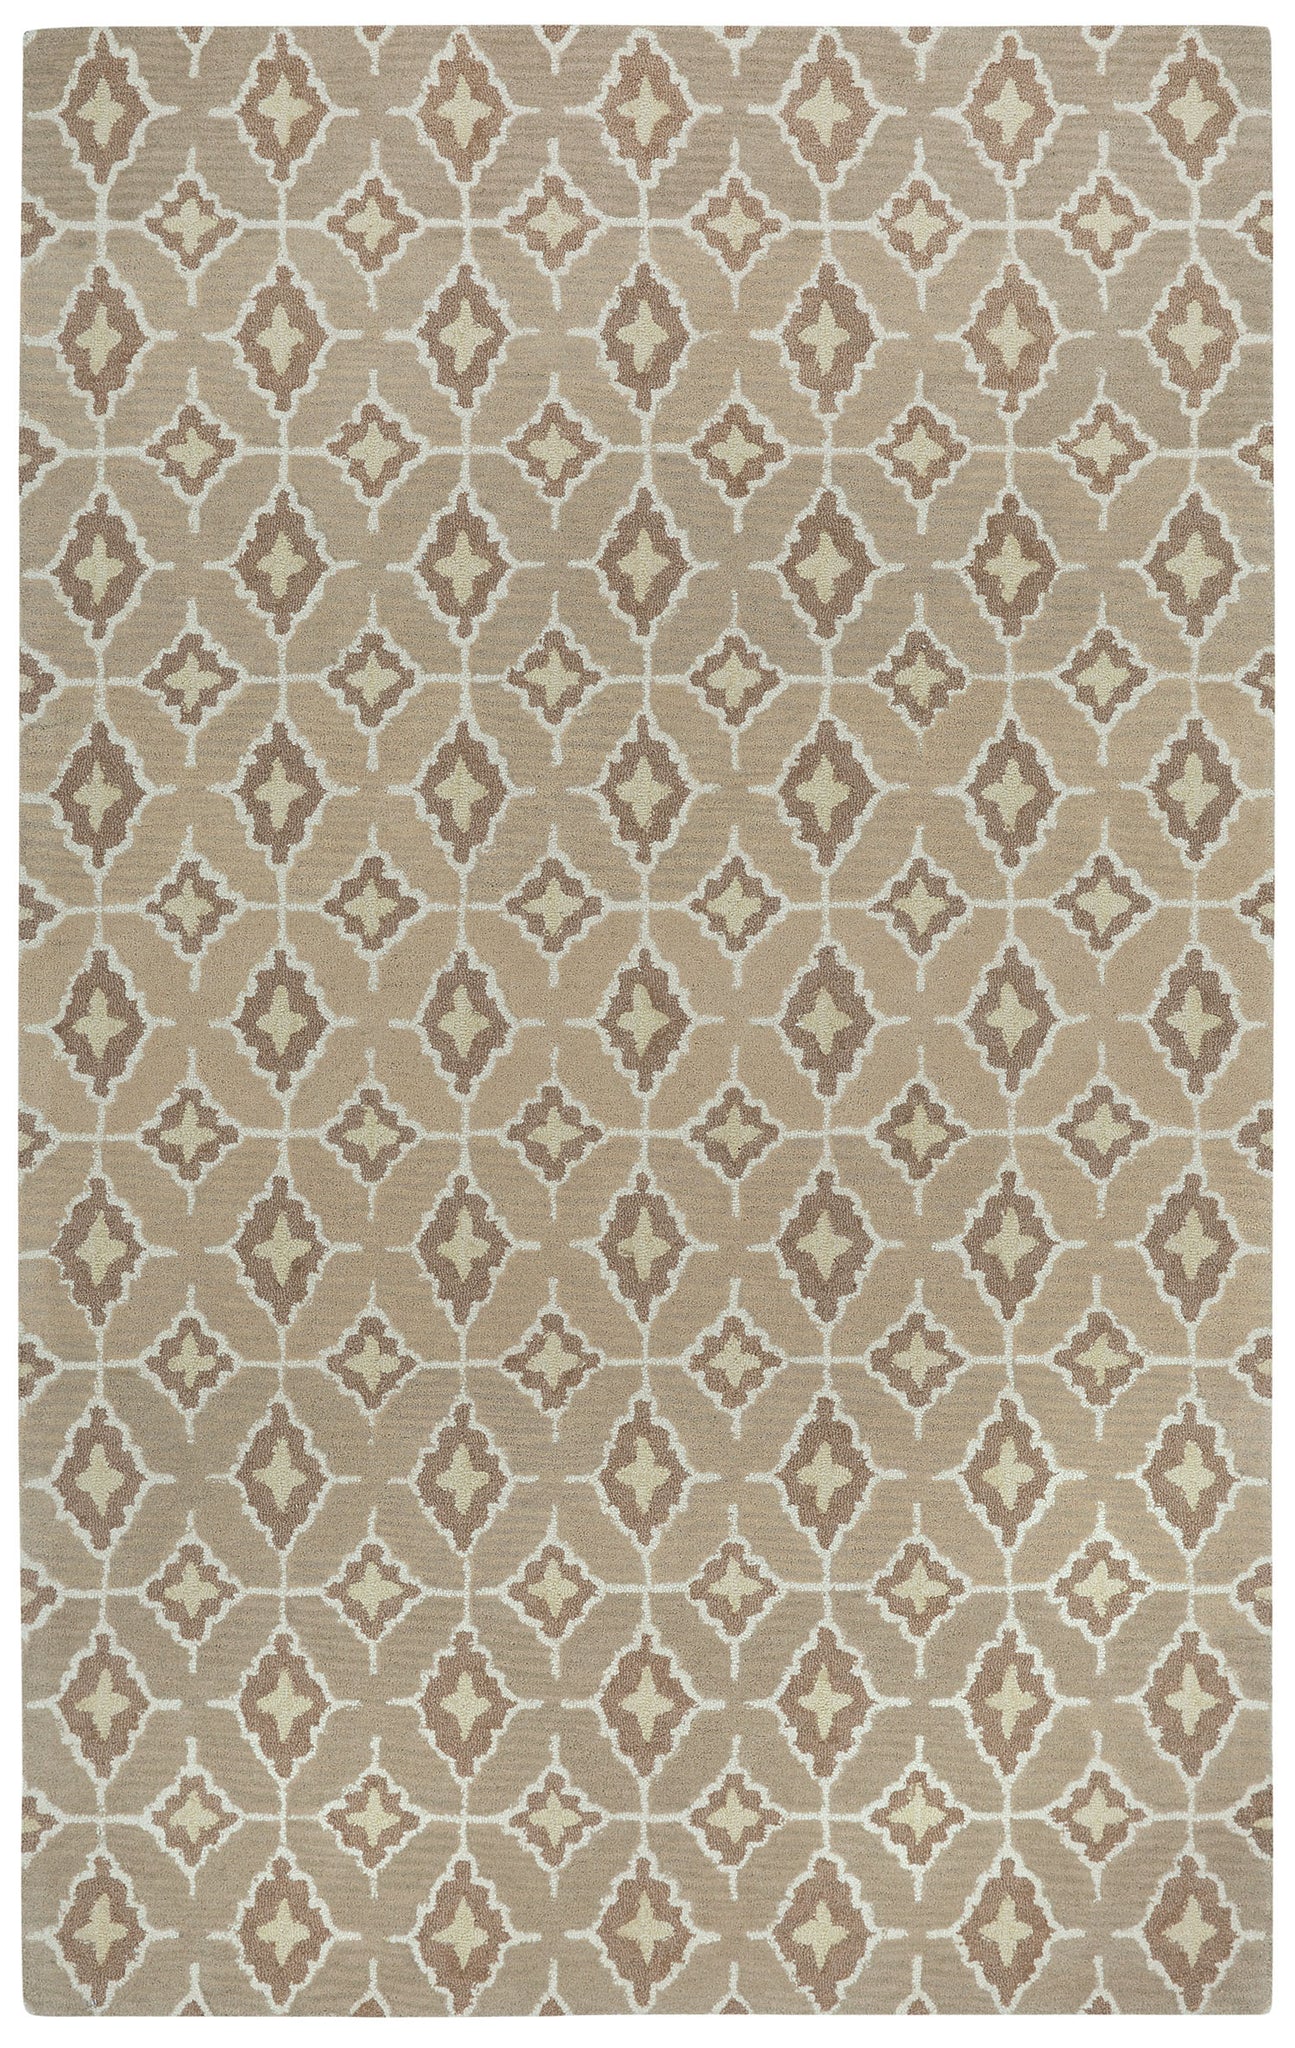 Capel Rossio 9197 Biscuit Yellow 710 Area Rug main image